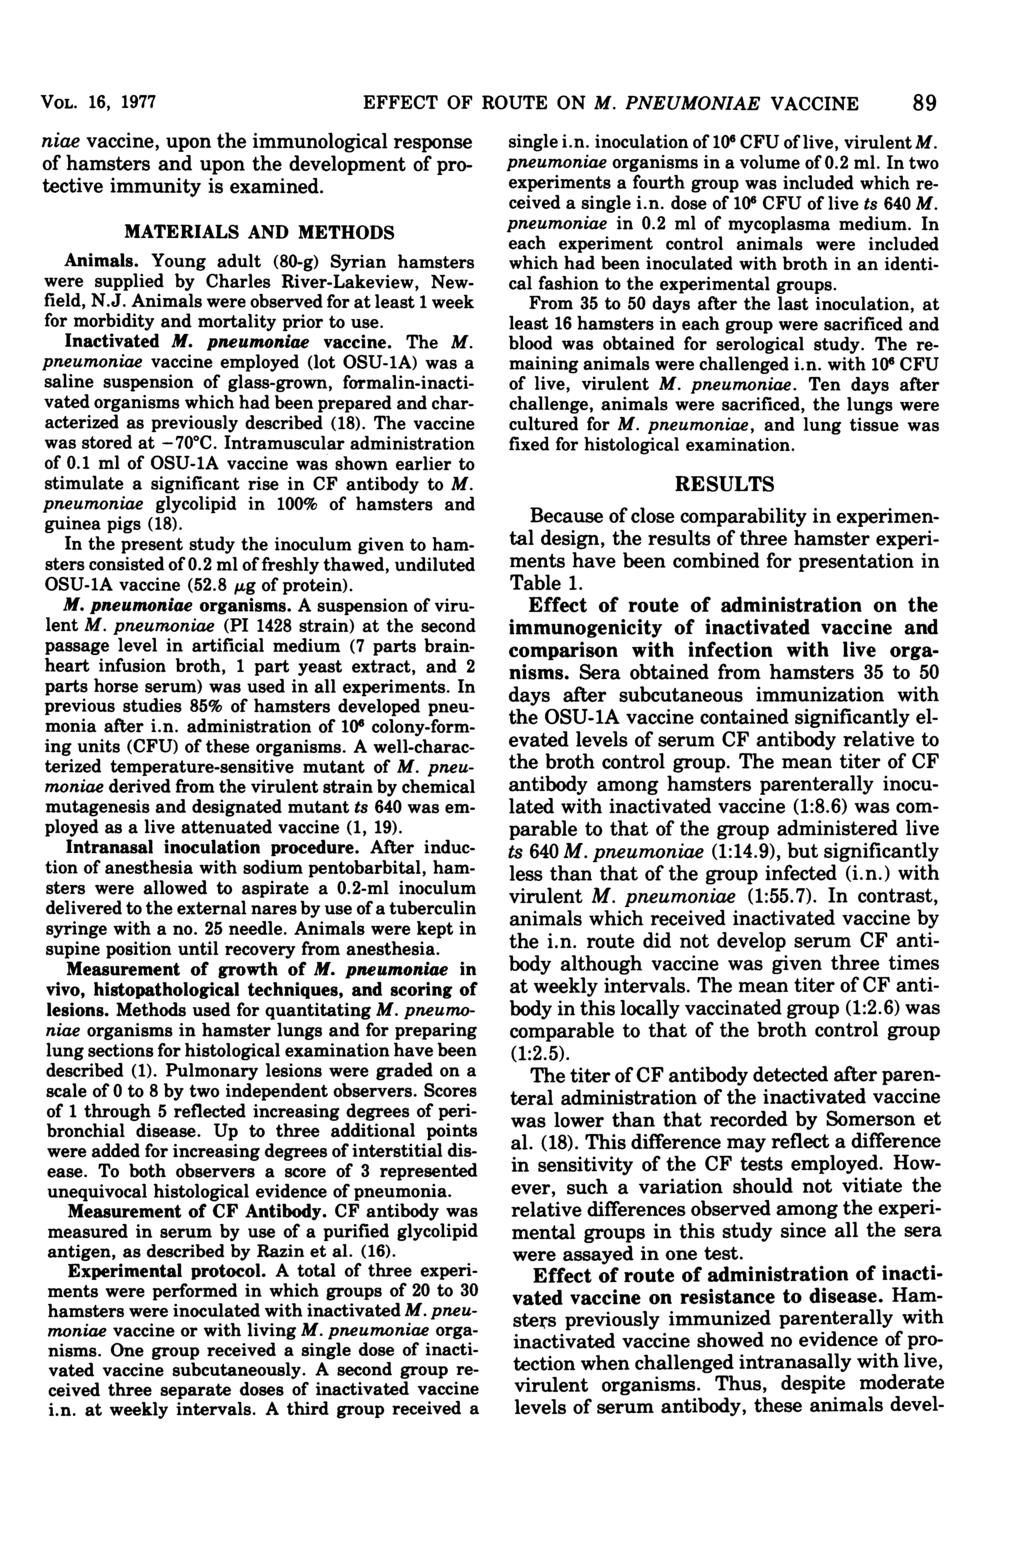 VOL. 16, 1977 niae vaccine, upon the immunological response of hamsters and upon the development of protective immunity is examined. MATERIALS AND METHODS Animals.